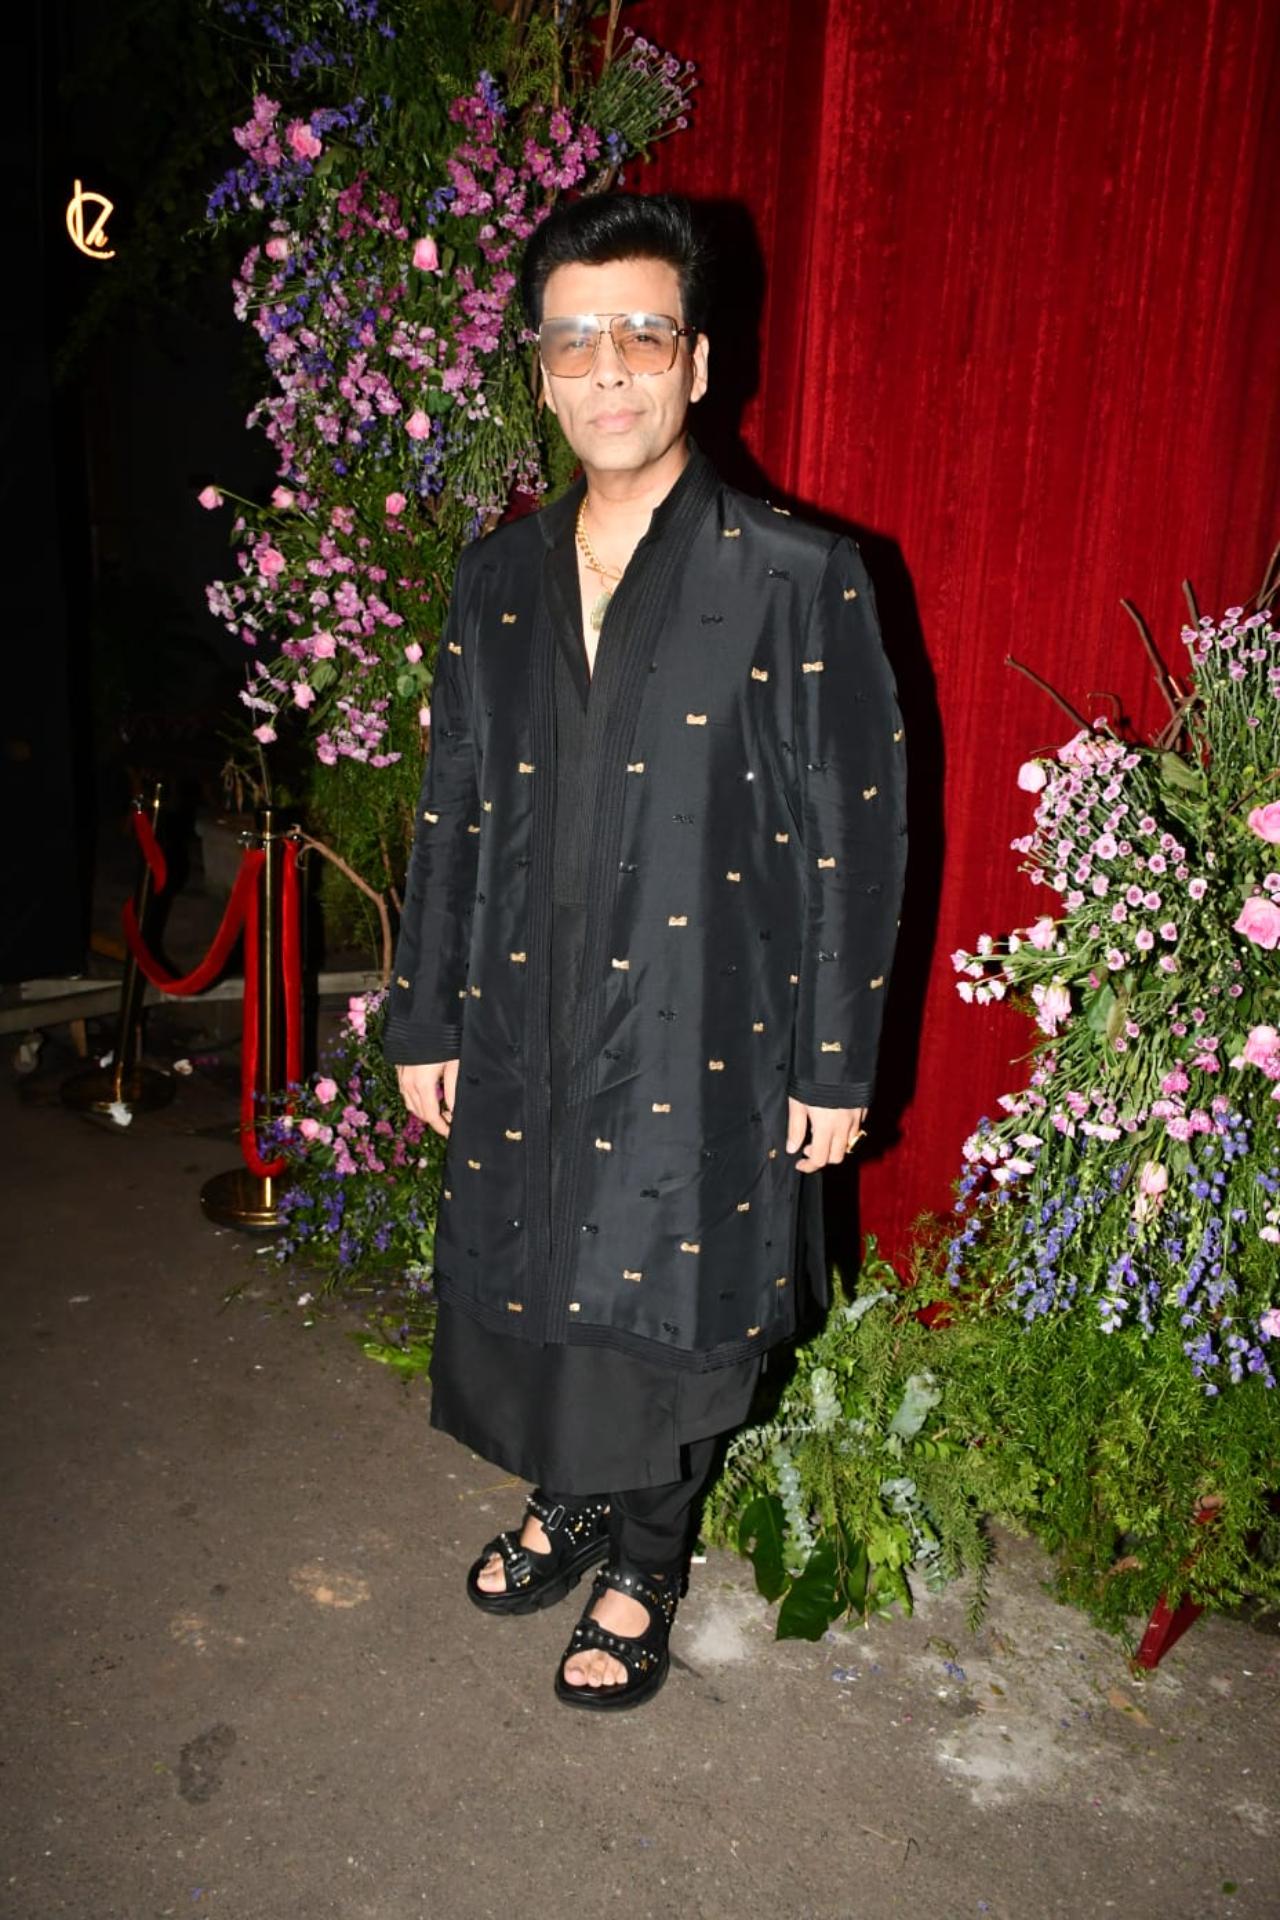 Karan Johar strikes a pose for the paparazzi at the venue in an all-black outfit 